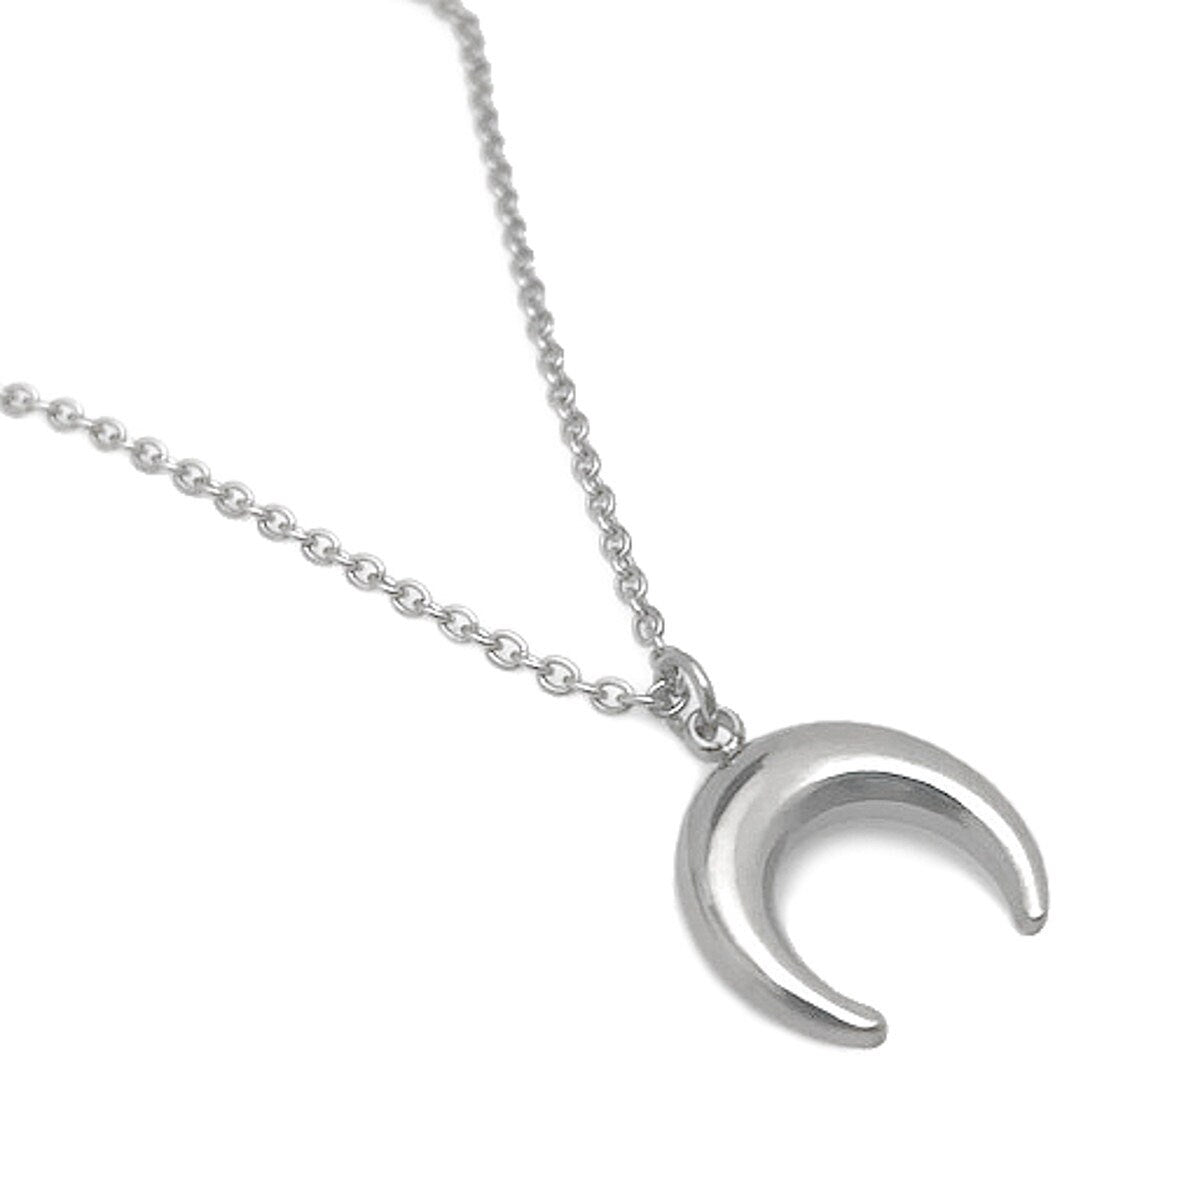 Upside Down Crescent Moon Necklace 24